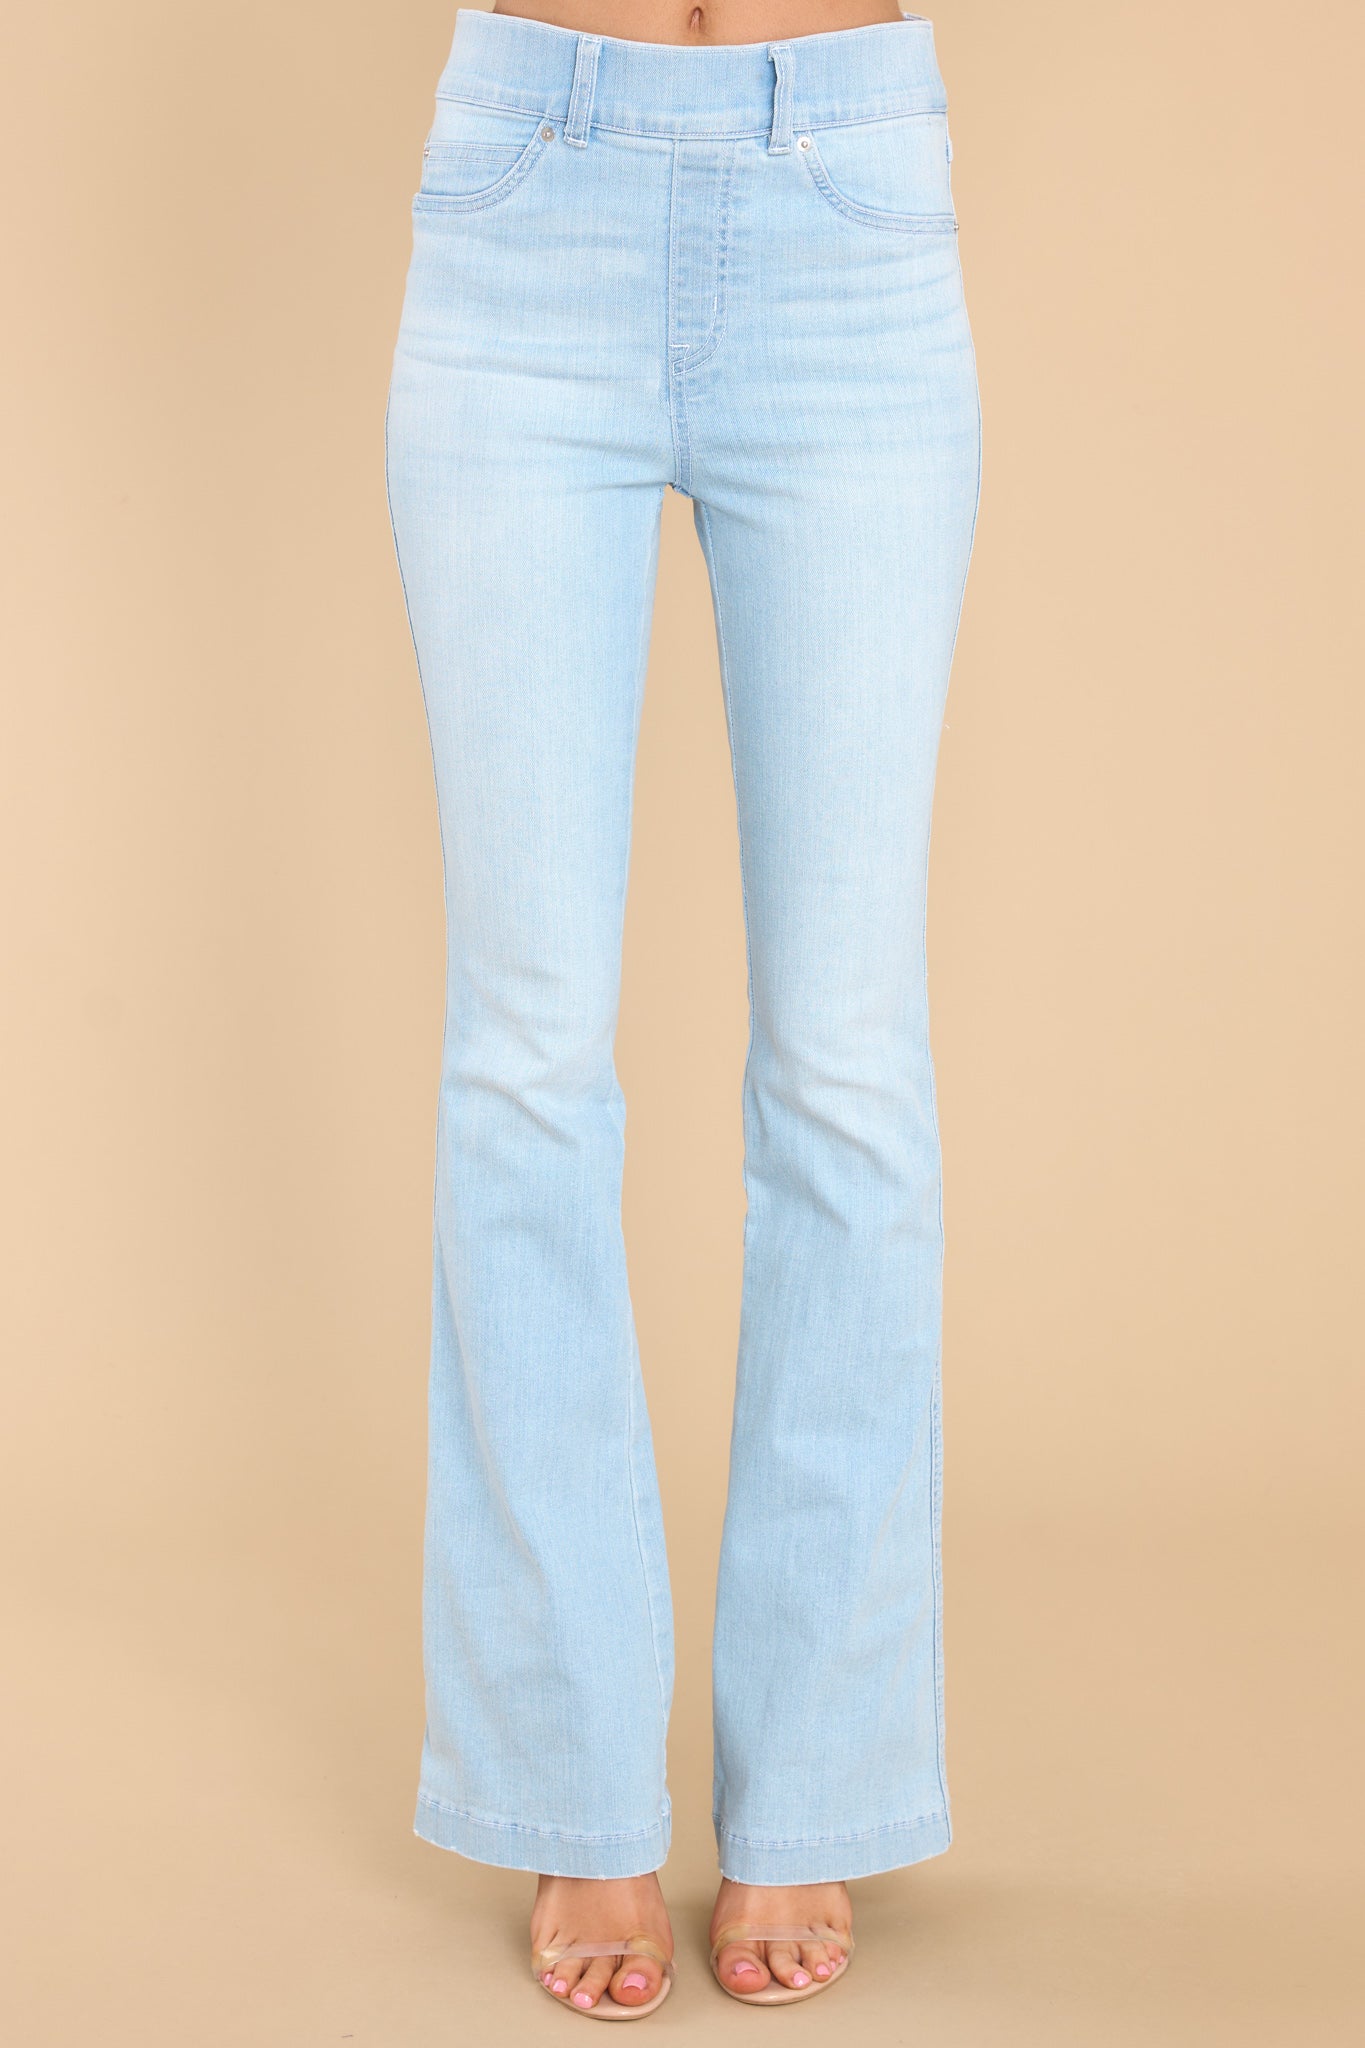 Spanx's Flare Jeans Are A Must-Have For Fall